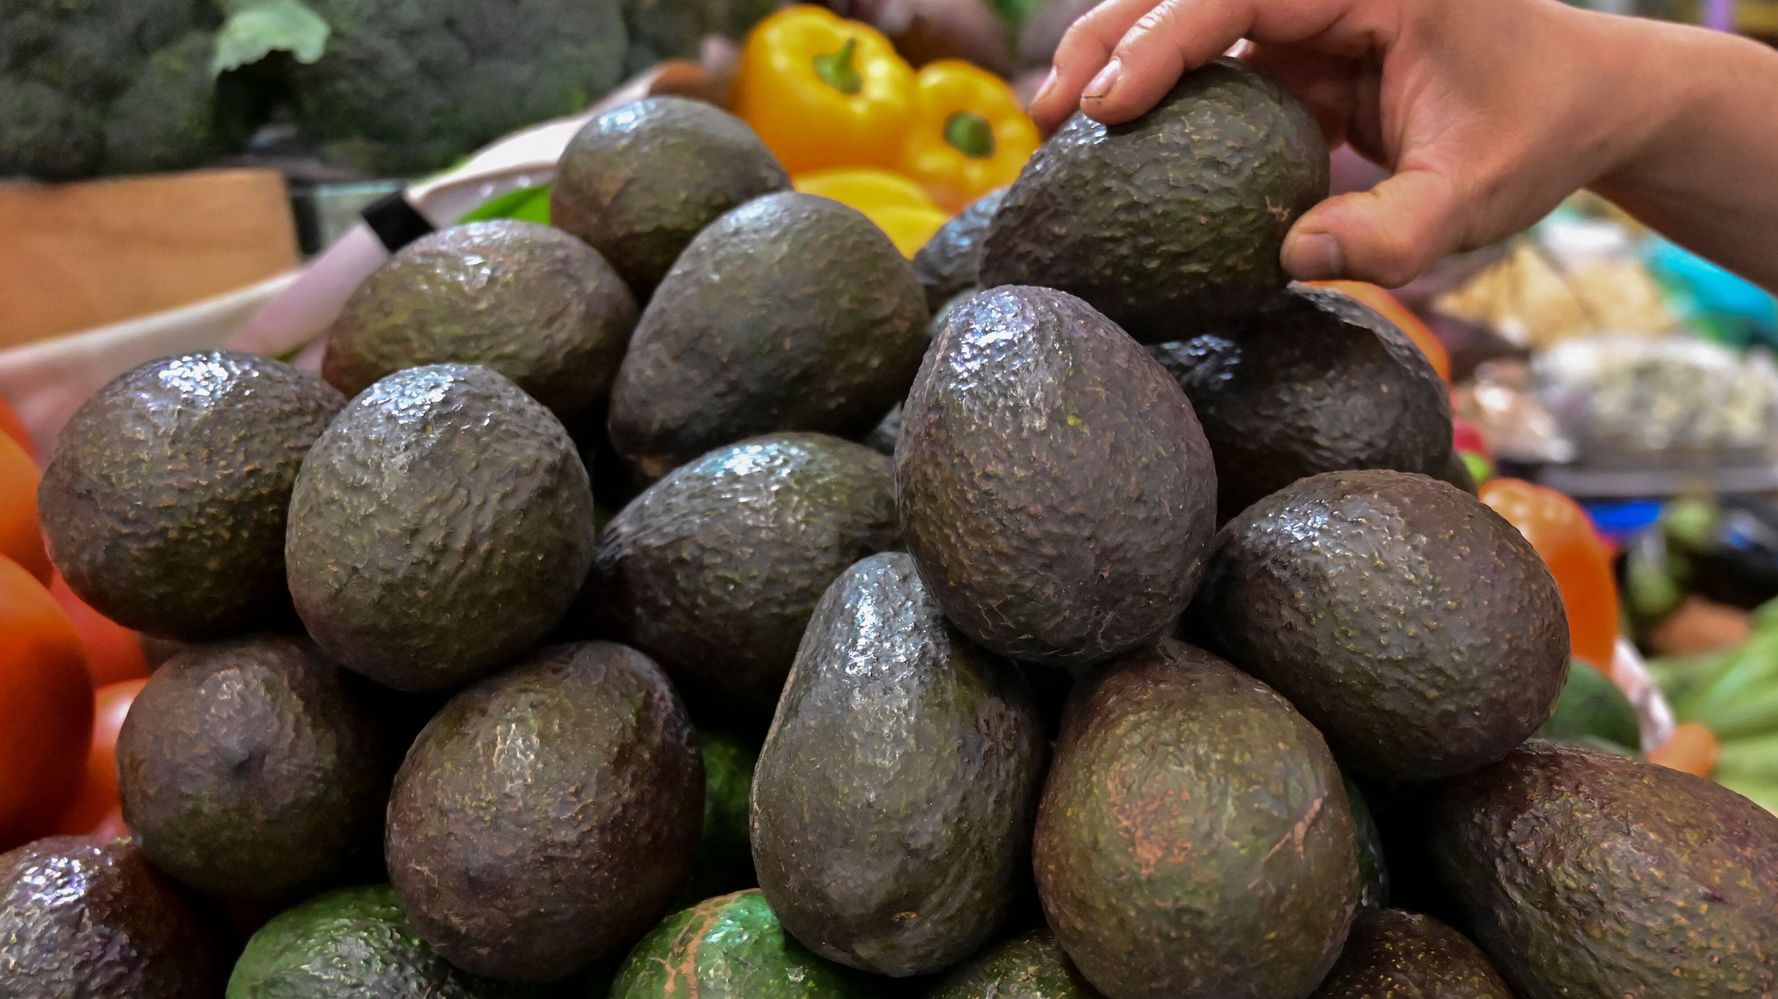 Mexican Avocados’ Ties To Drug Cartels And Deforestation Are An Open Secret